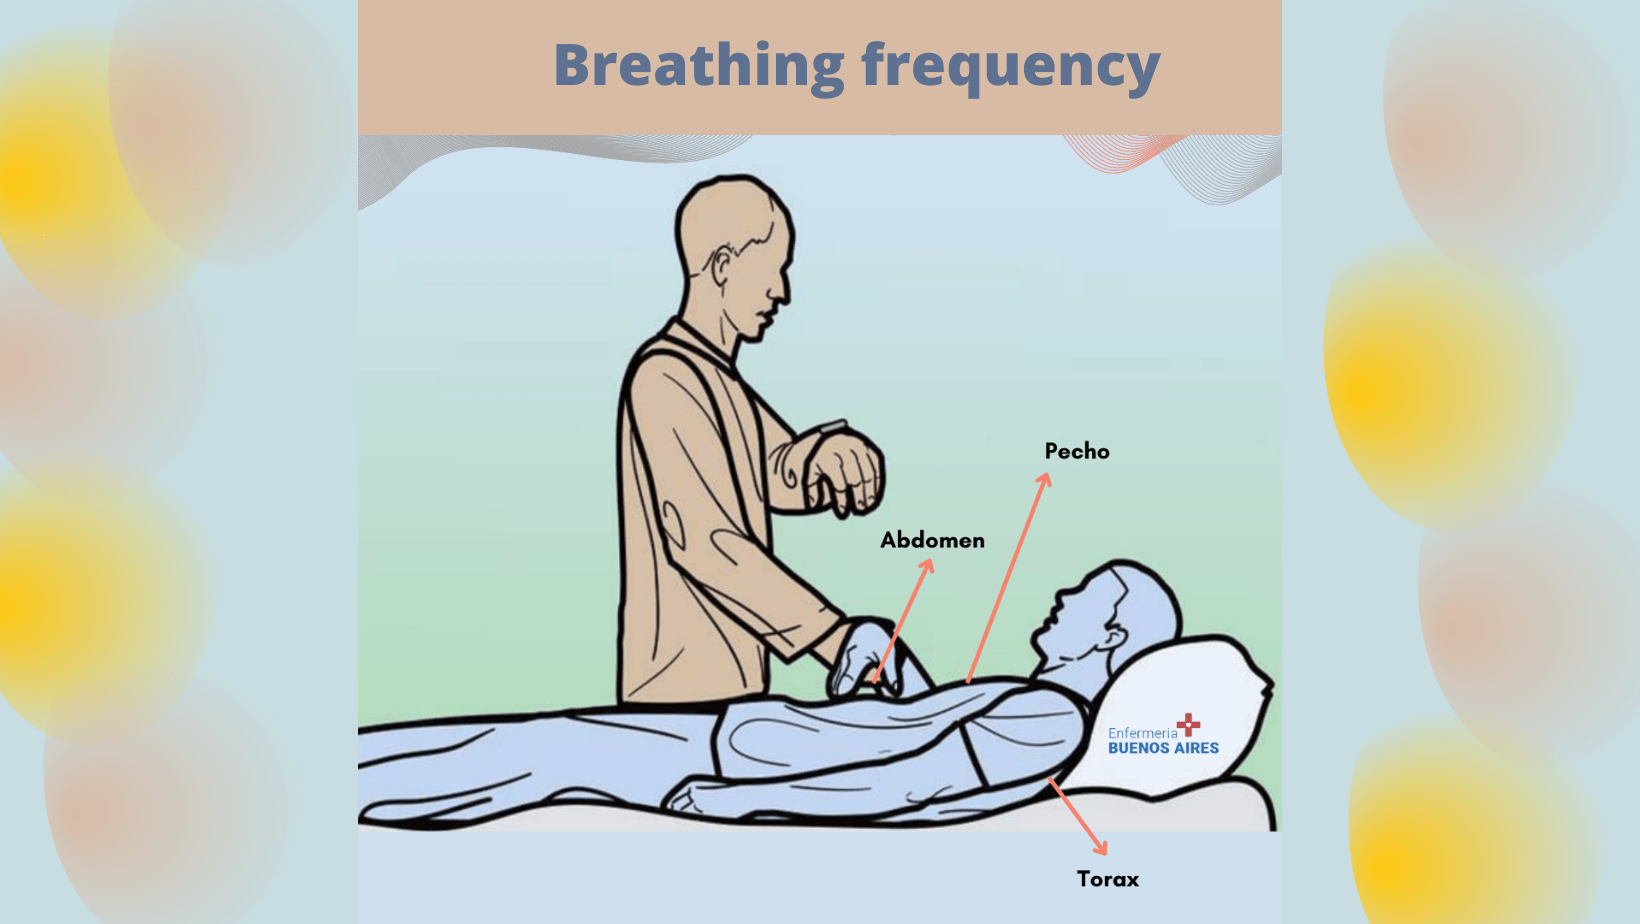 Breathing frequency